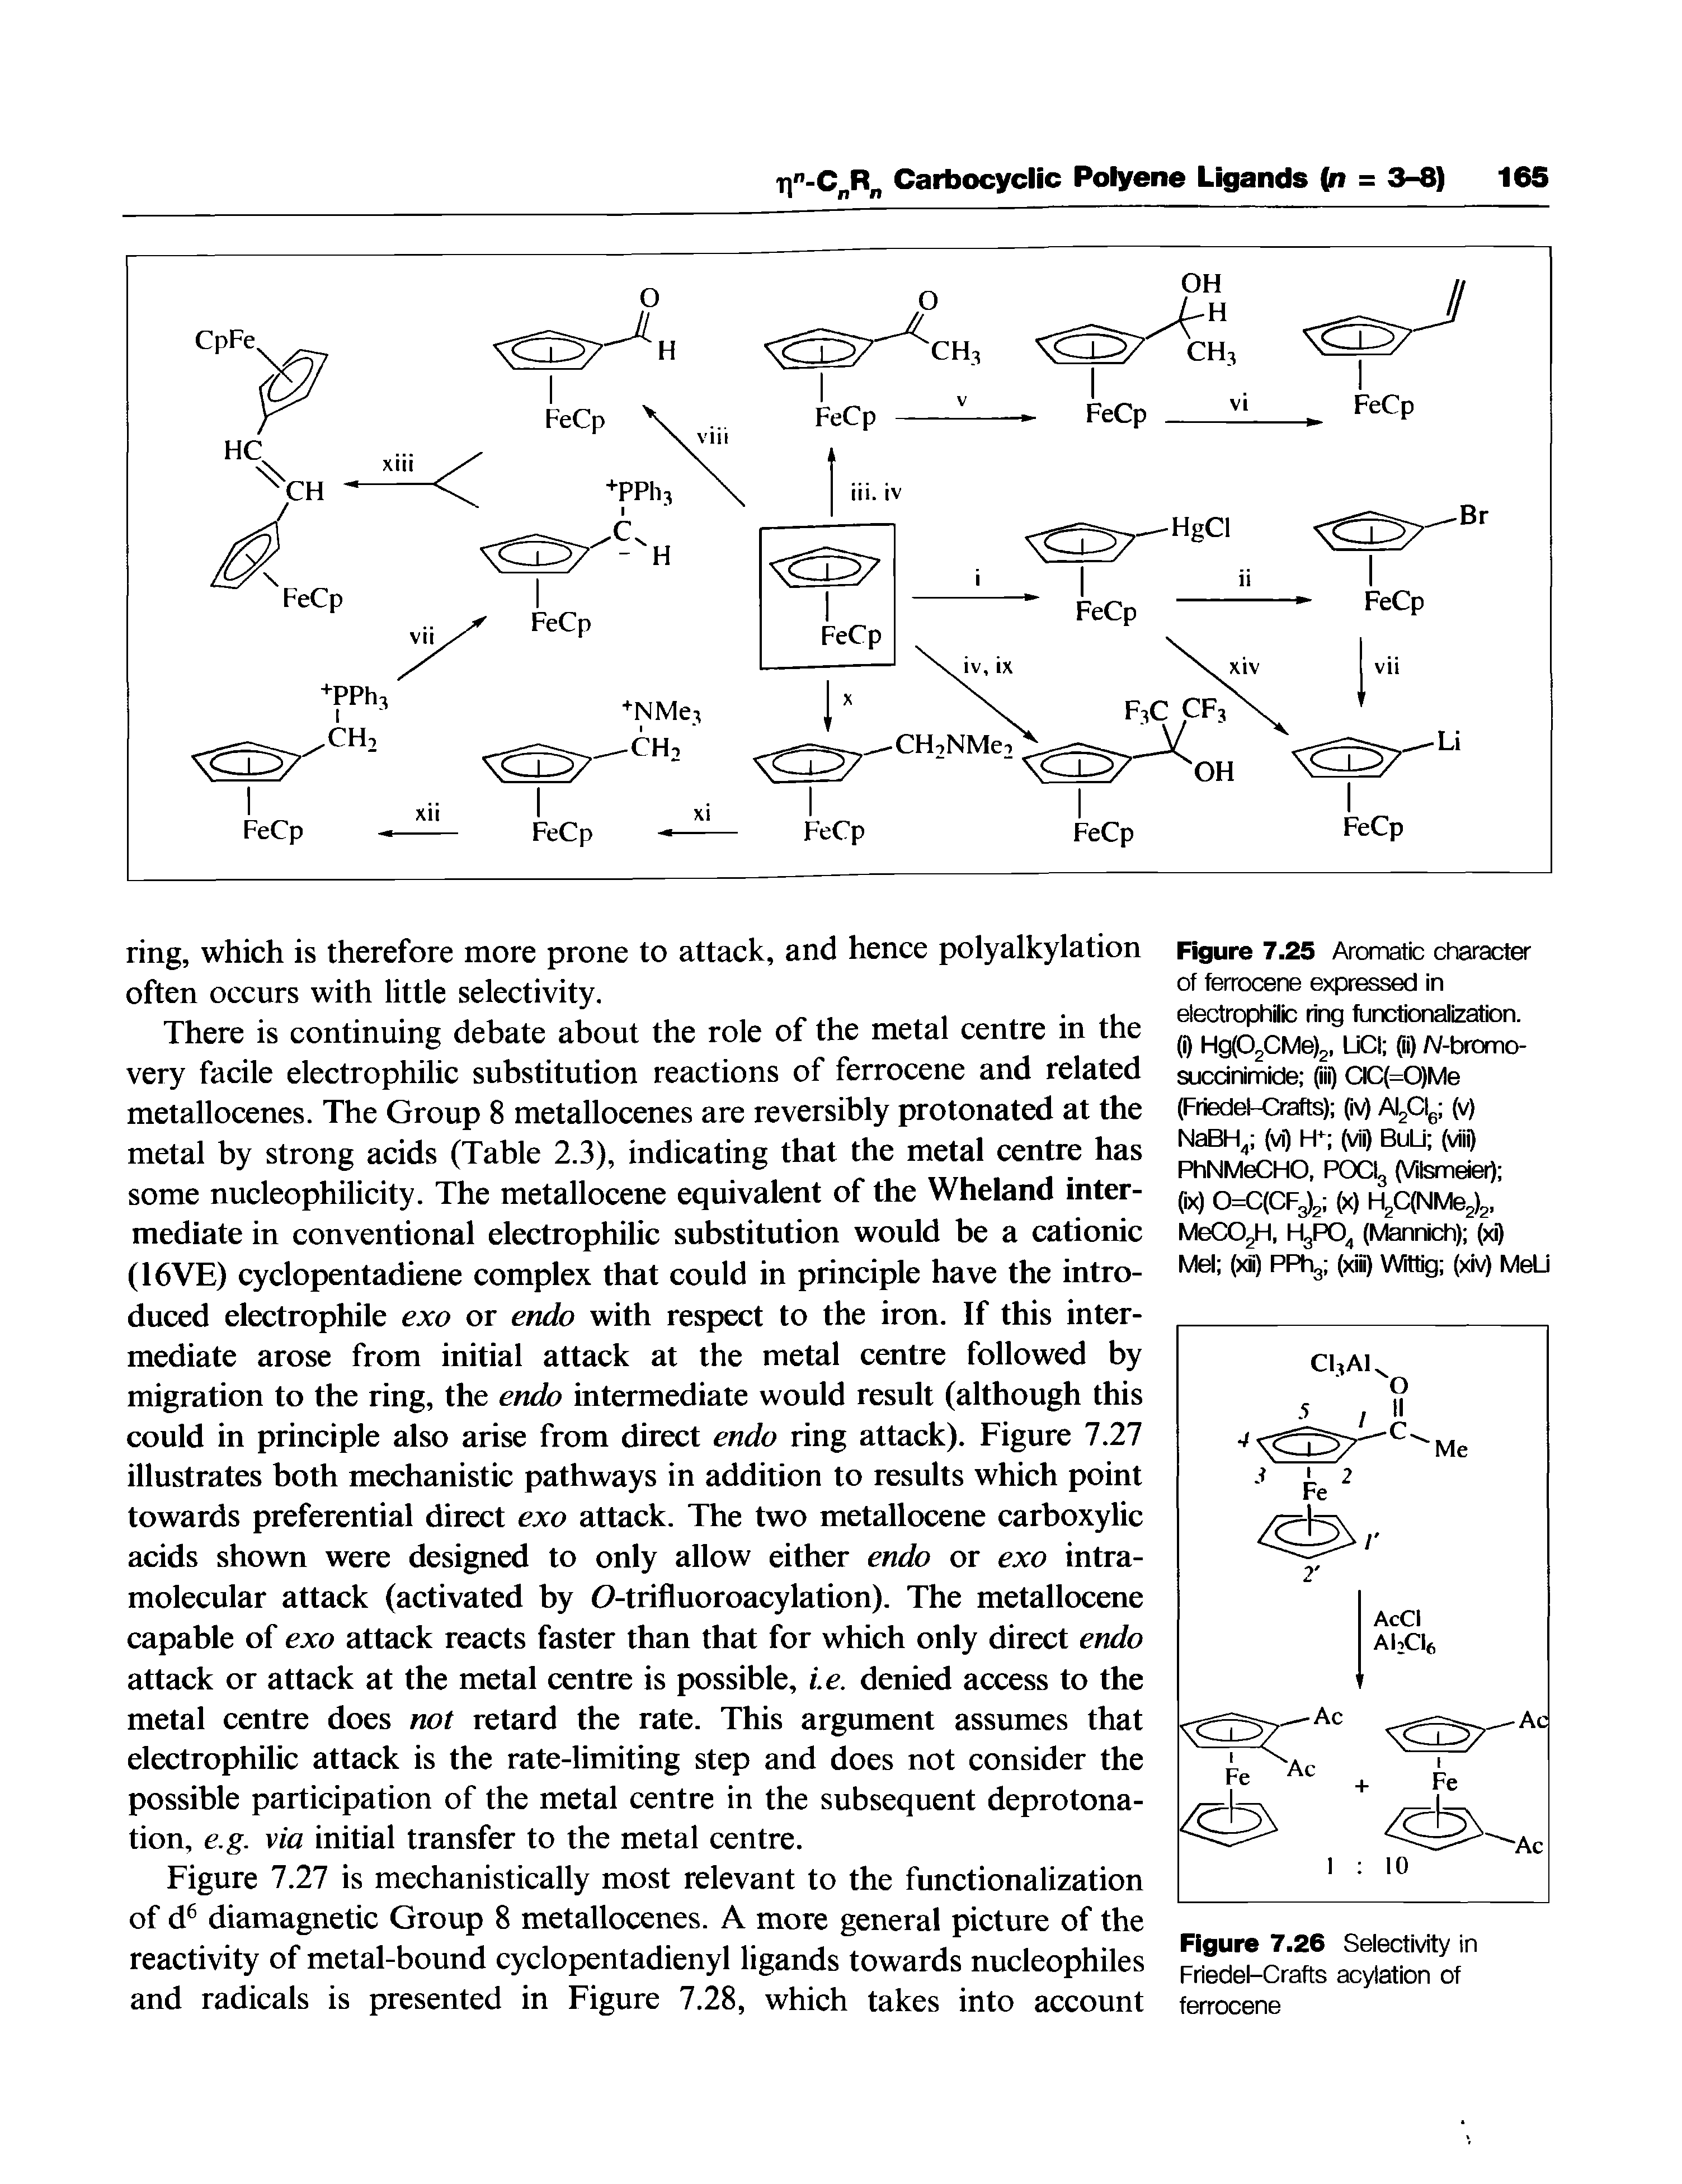 Figure 7.25 Aromatic character of ferrocene expressed in electrophilic ring functionalization.